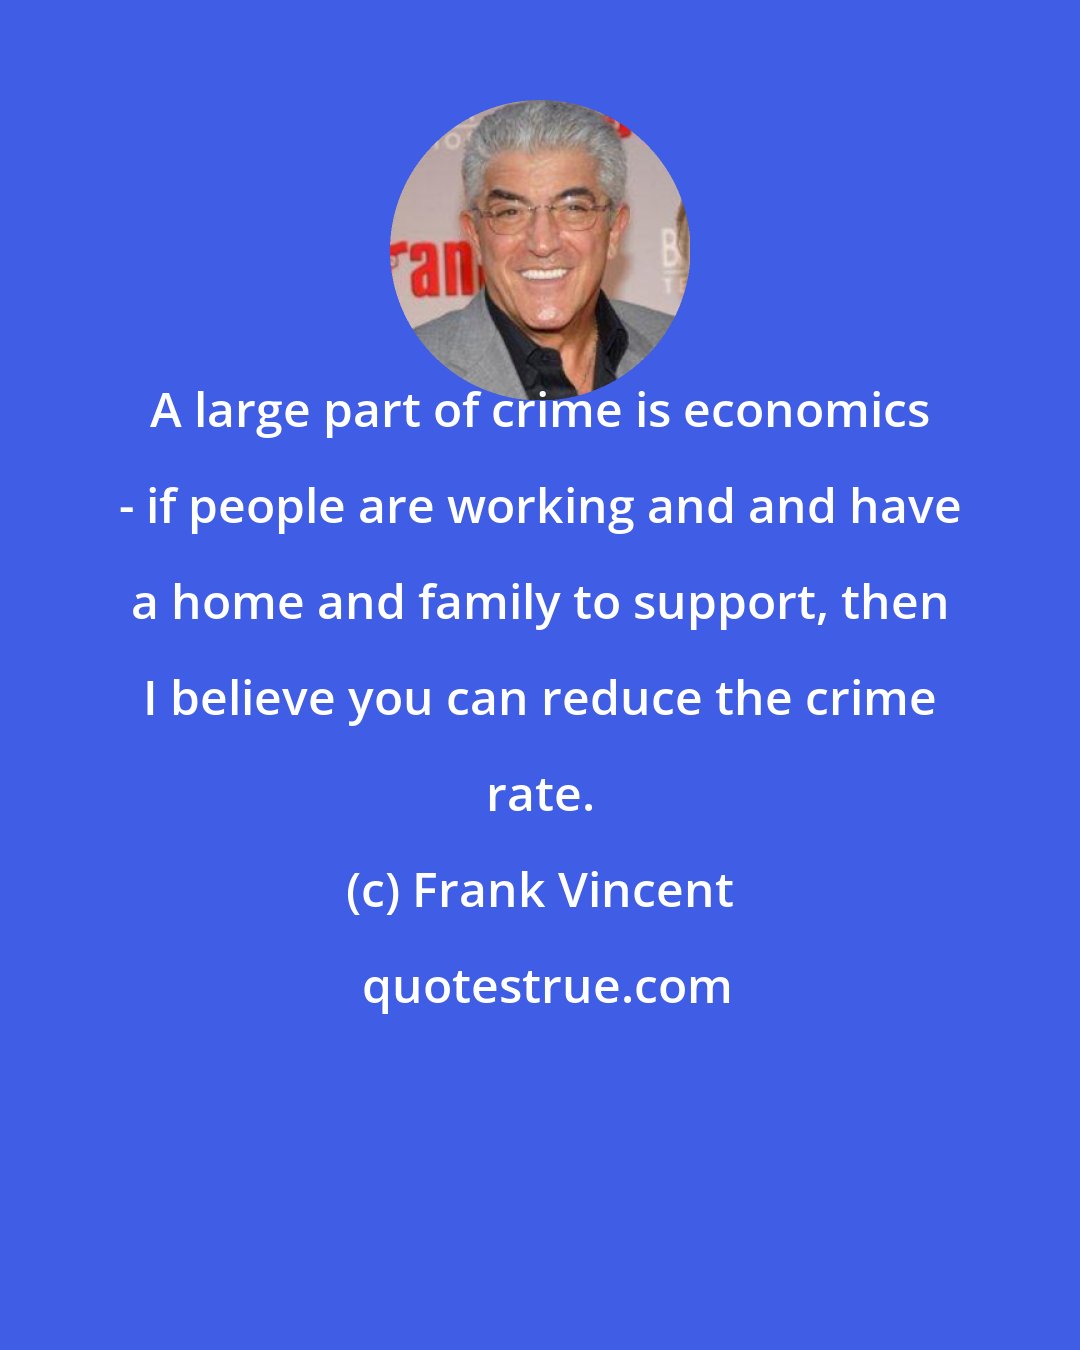 Frank Vincent: A large part of crime is economics - if people are working and and have a home and family to support, then I believe you can reduce the crime rate.